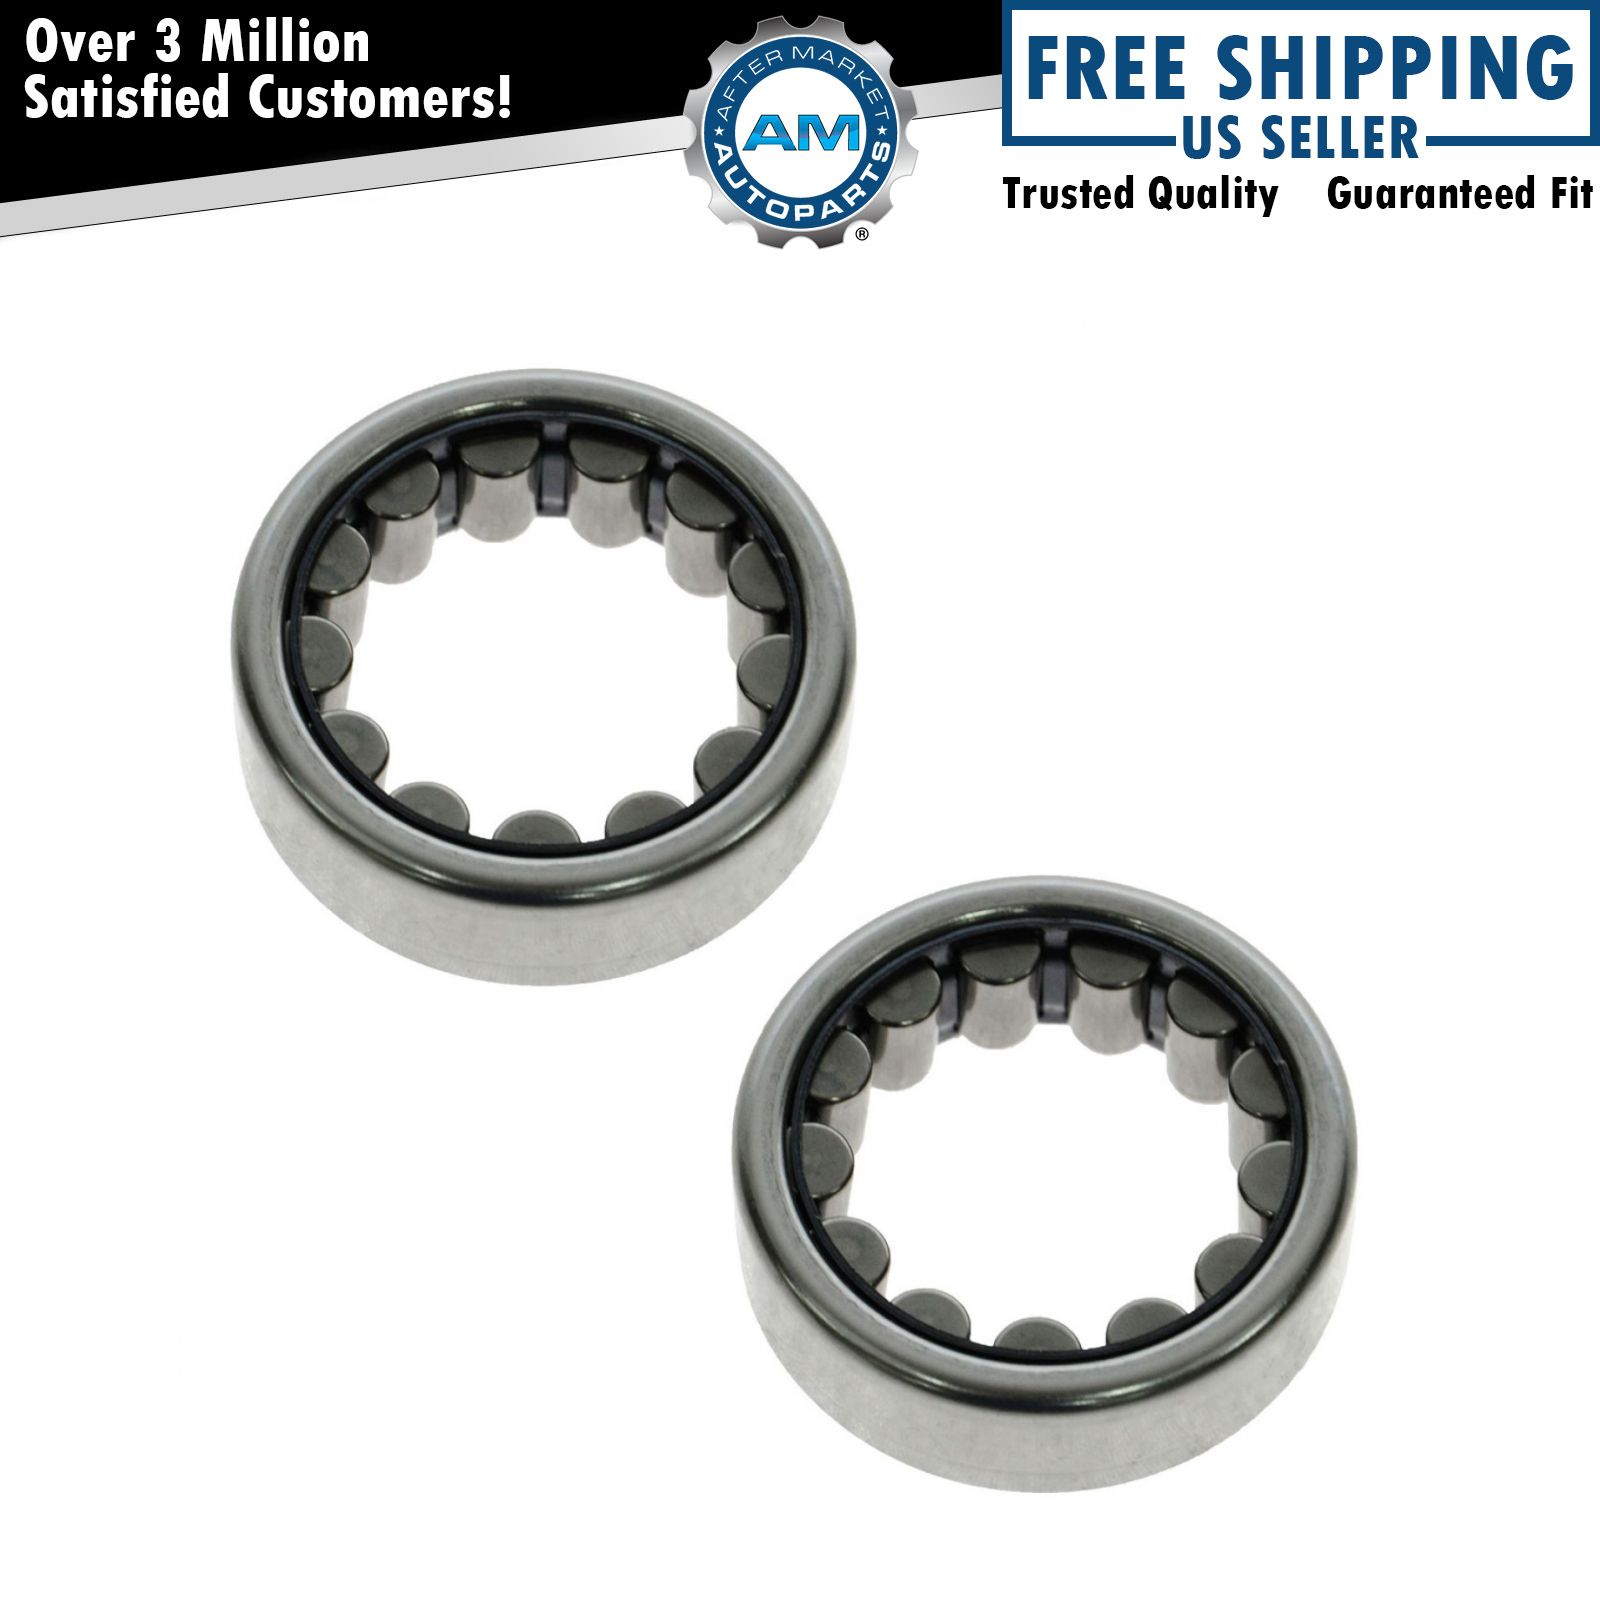 TIMKEN Axle Shaft Bearing Rear Pair for GM Dodge Ford Jeep with 8.75 Ring Gear